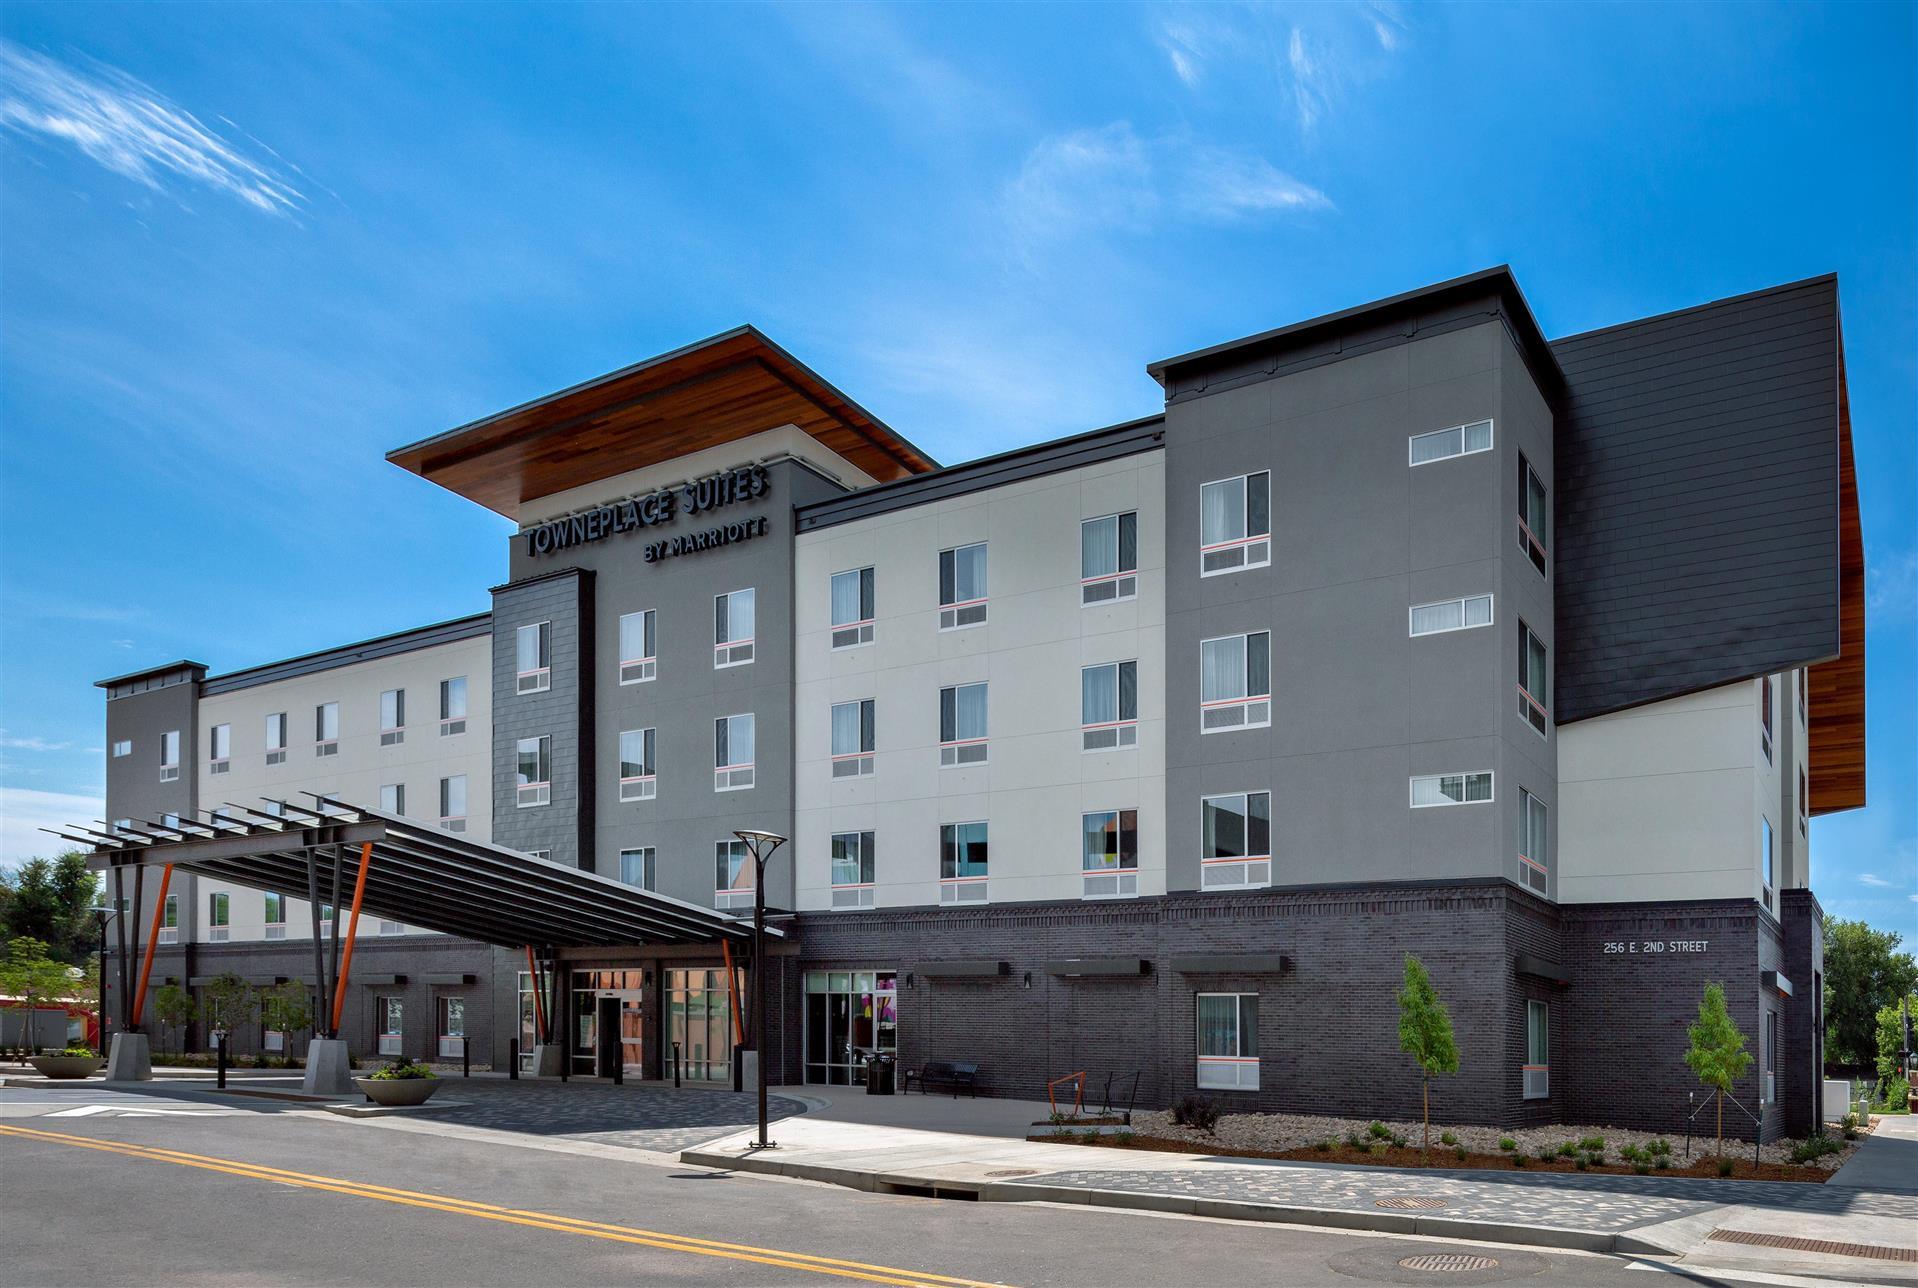 TownePlace Suites Loveland Fort Collins in Loveland, CO